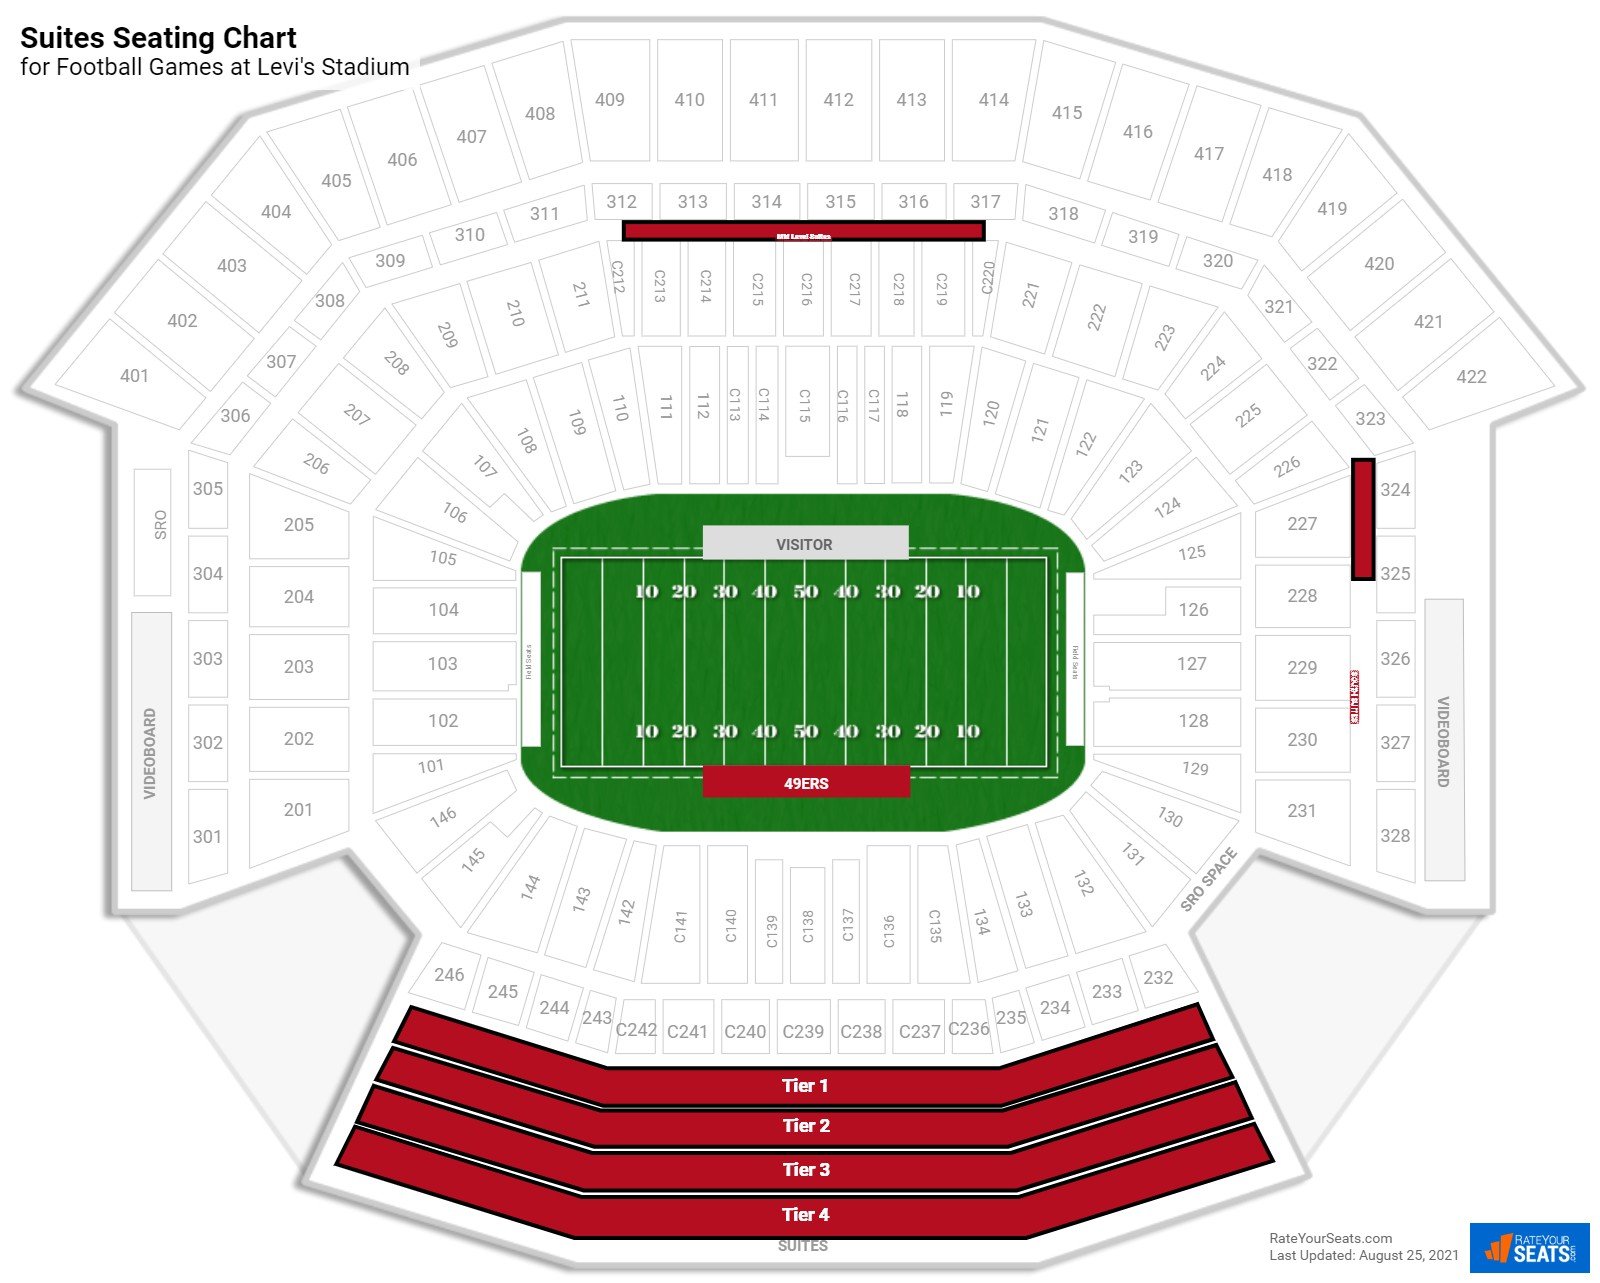 Football Suites Seating Chart at Levi